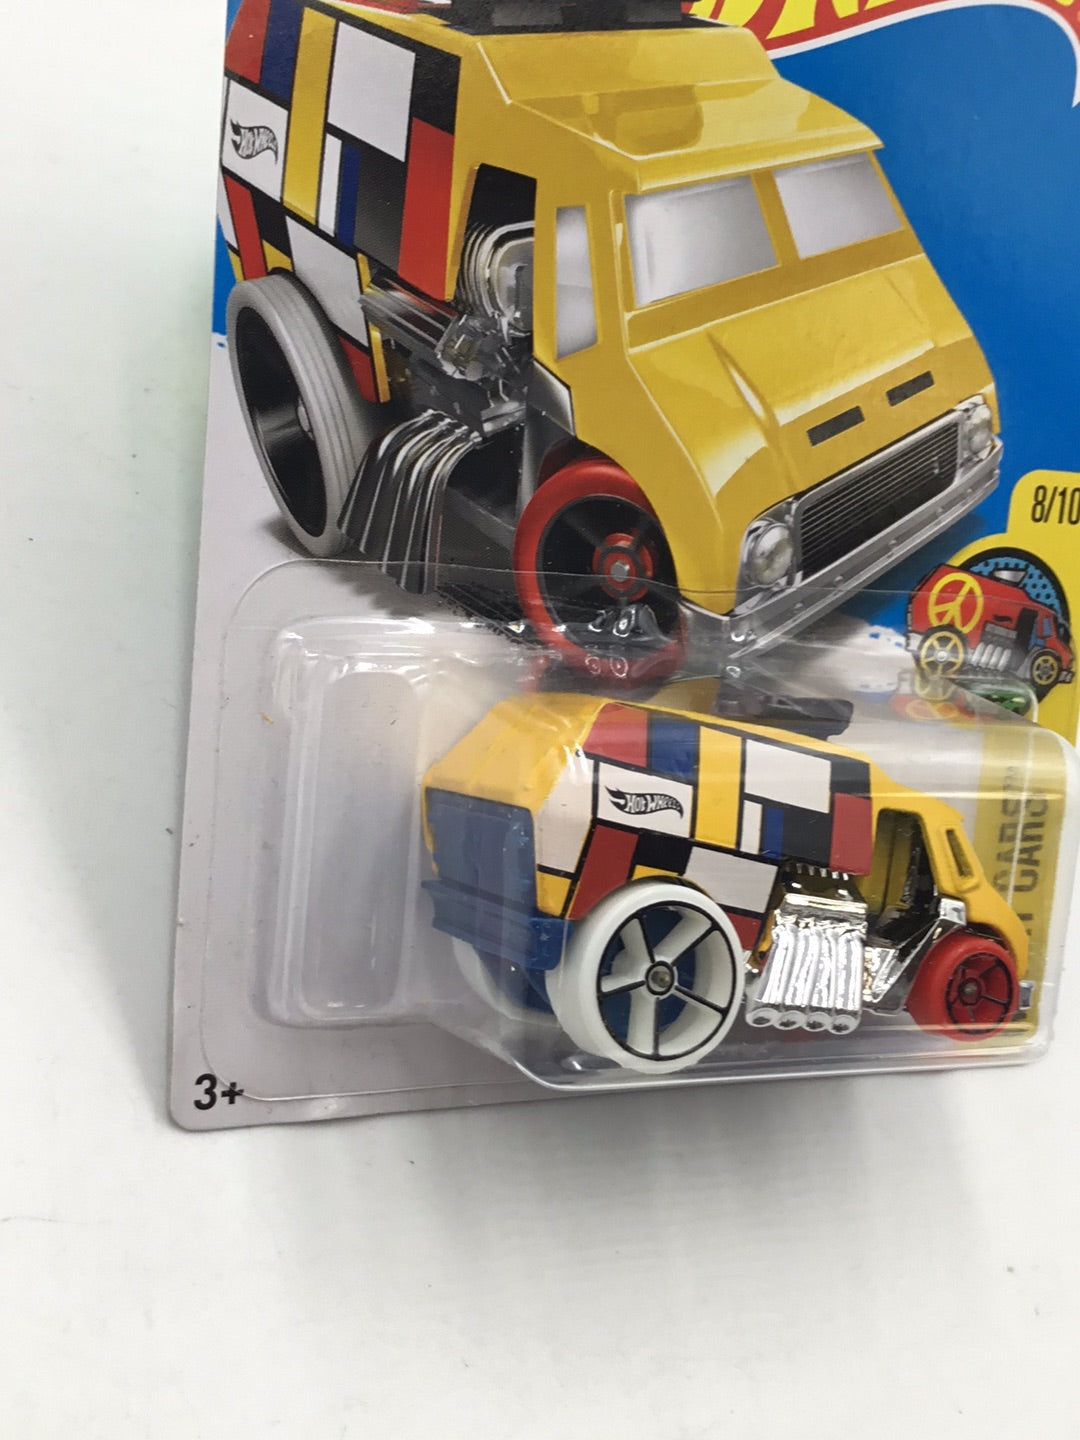 2017 Hot Wheels #8 Cool-One Kmart exclusive AA7